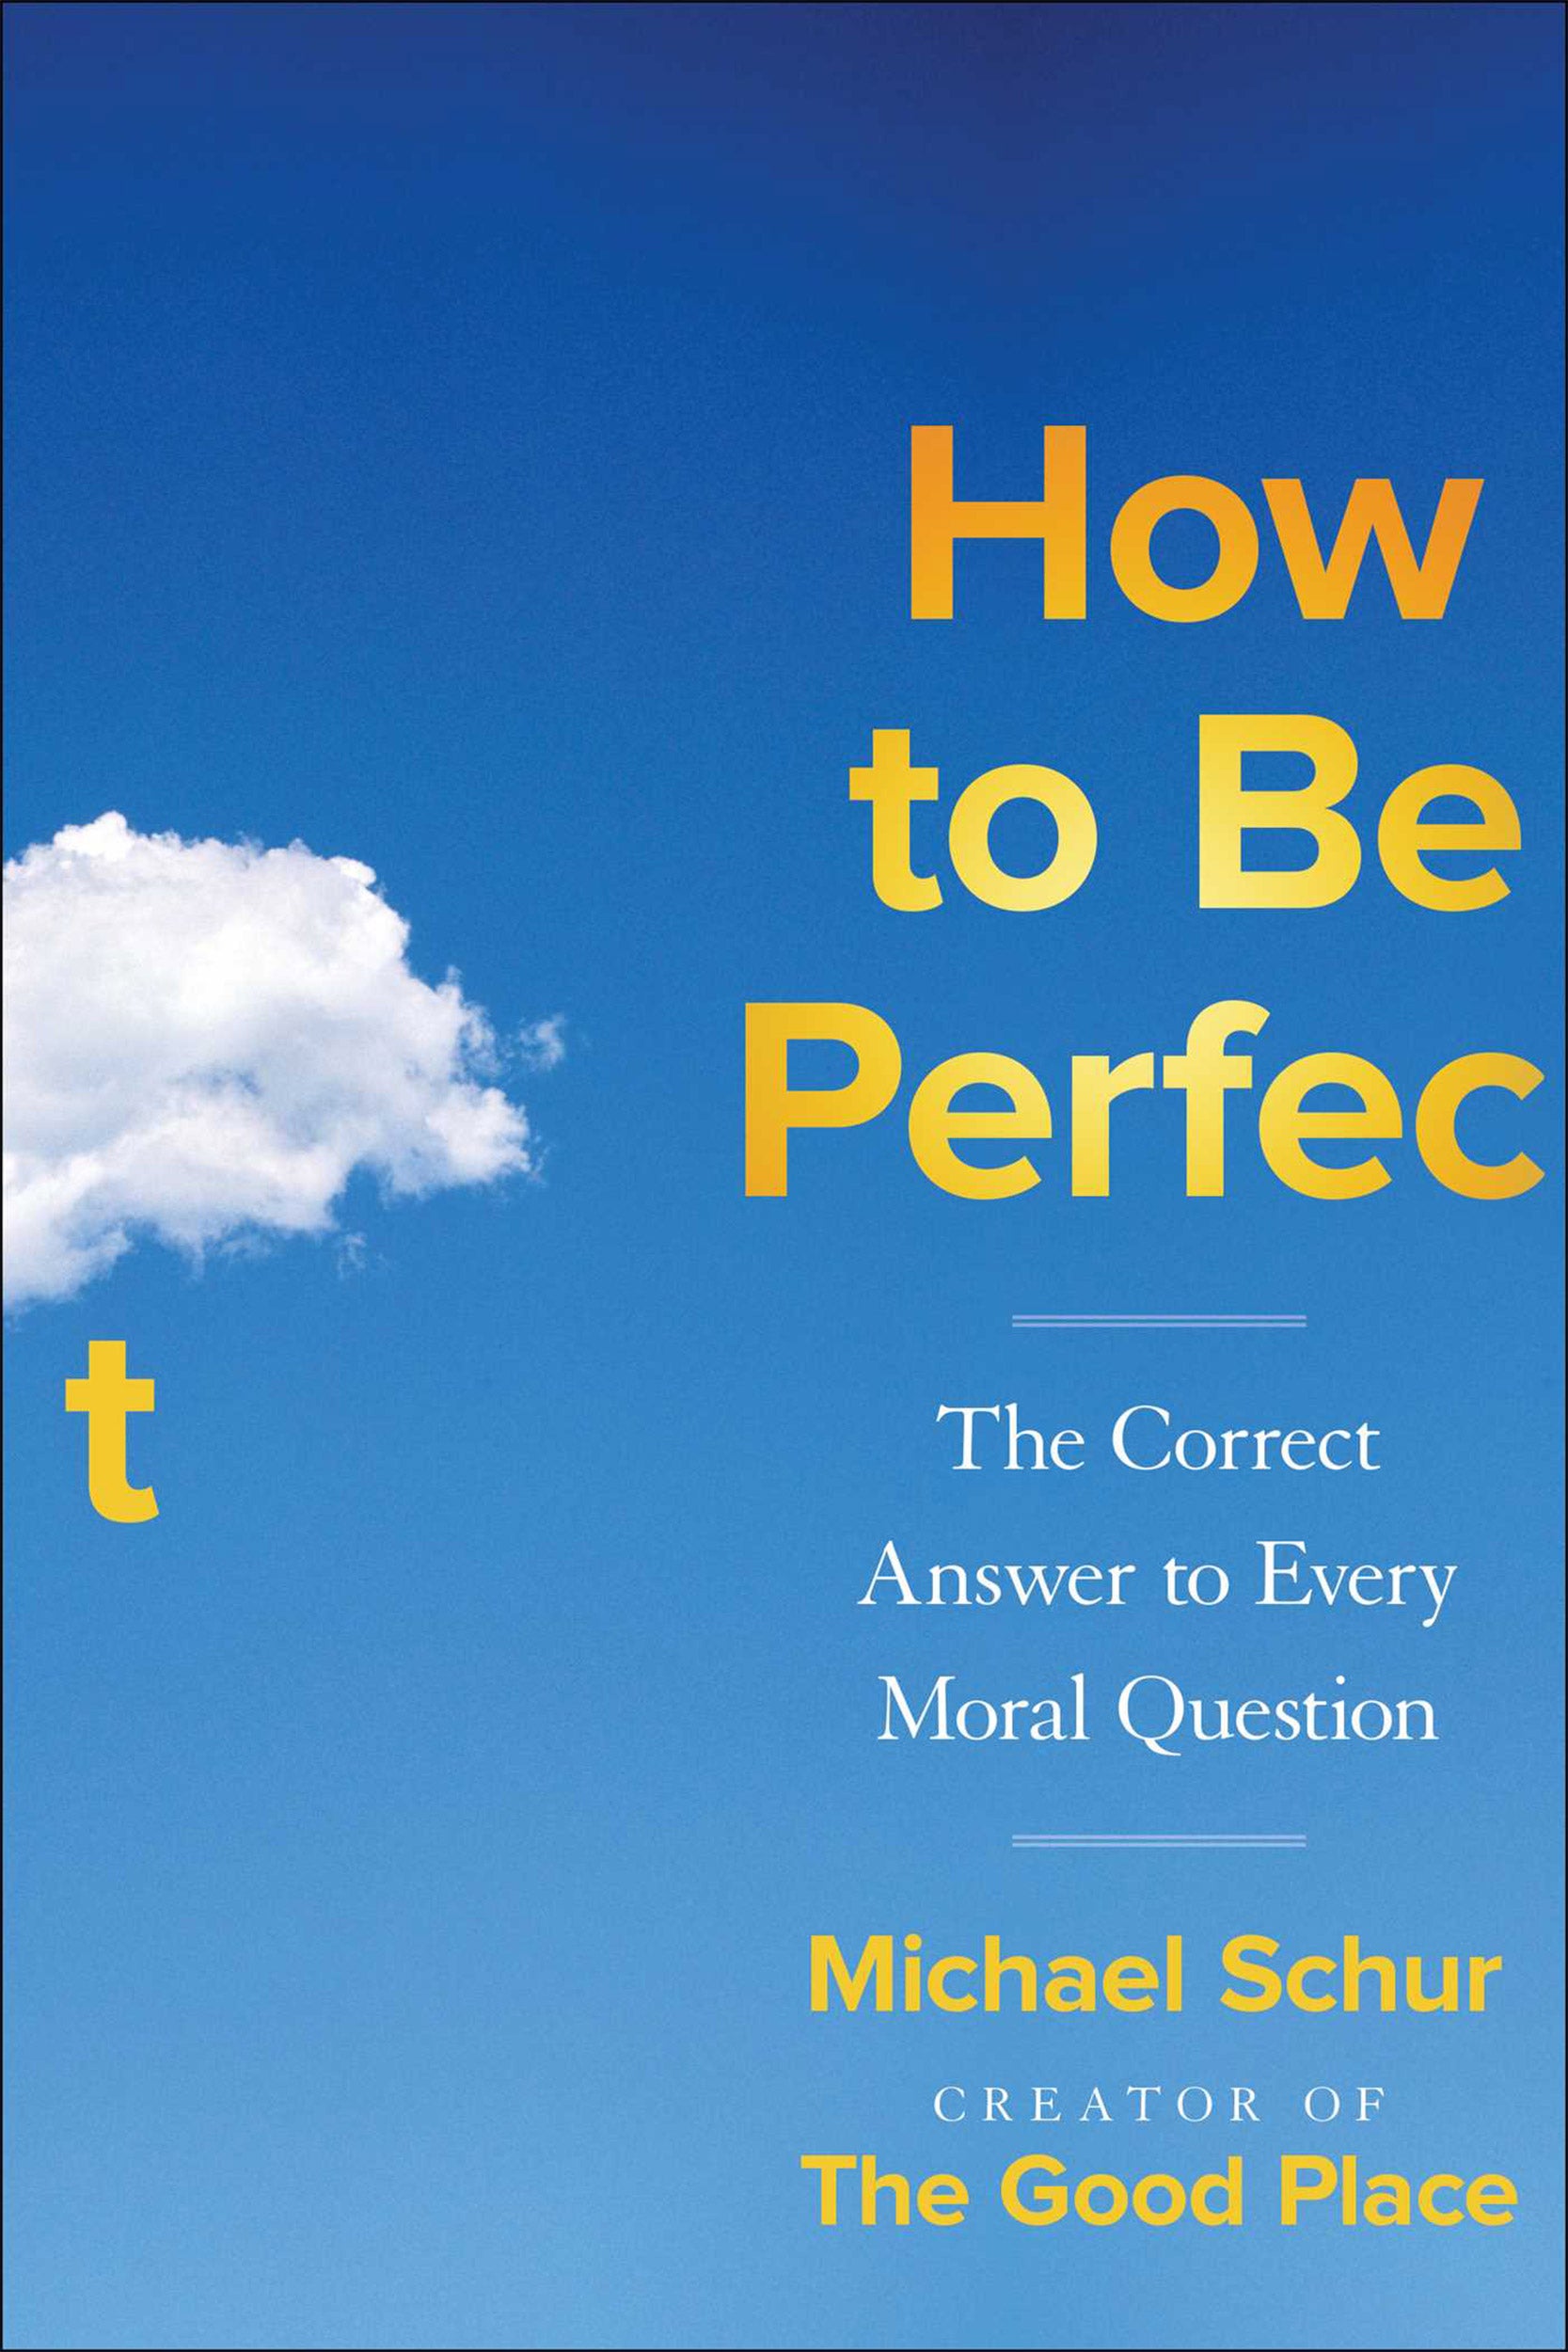 How to Be Perfect Book cover.